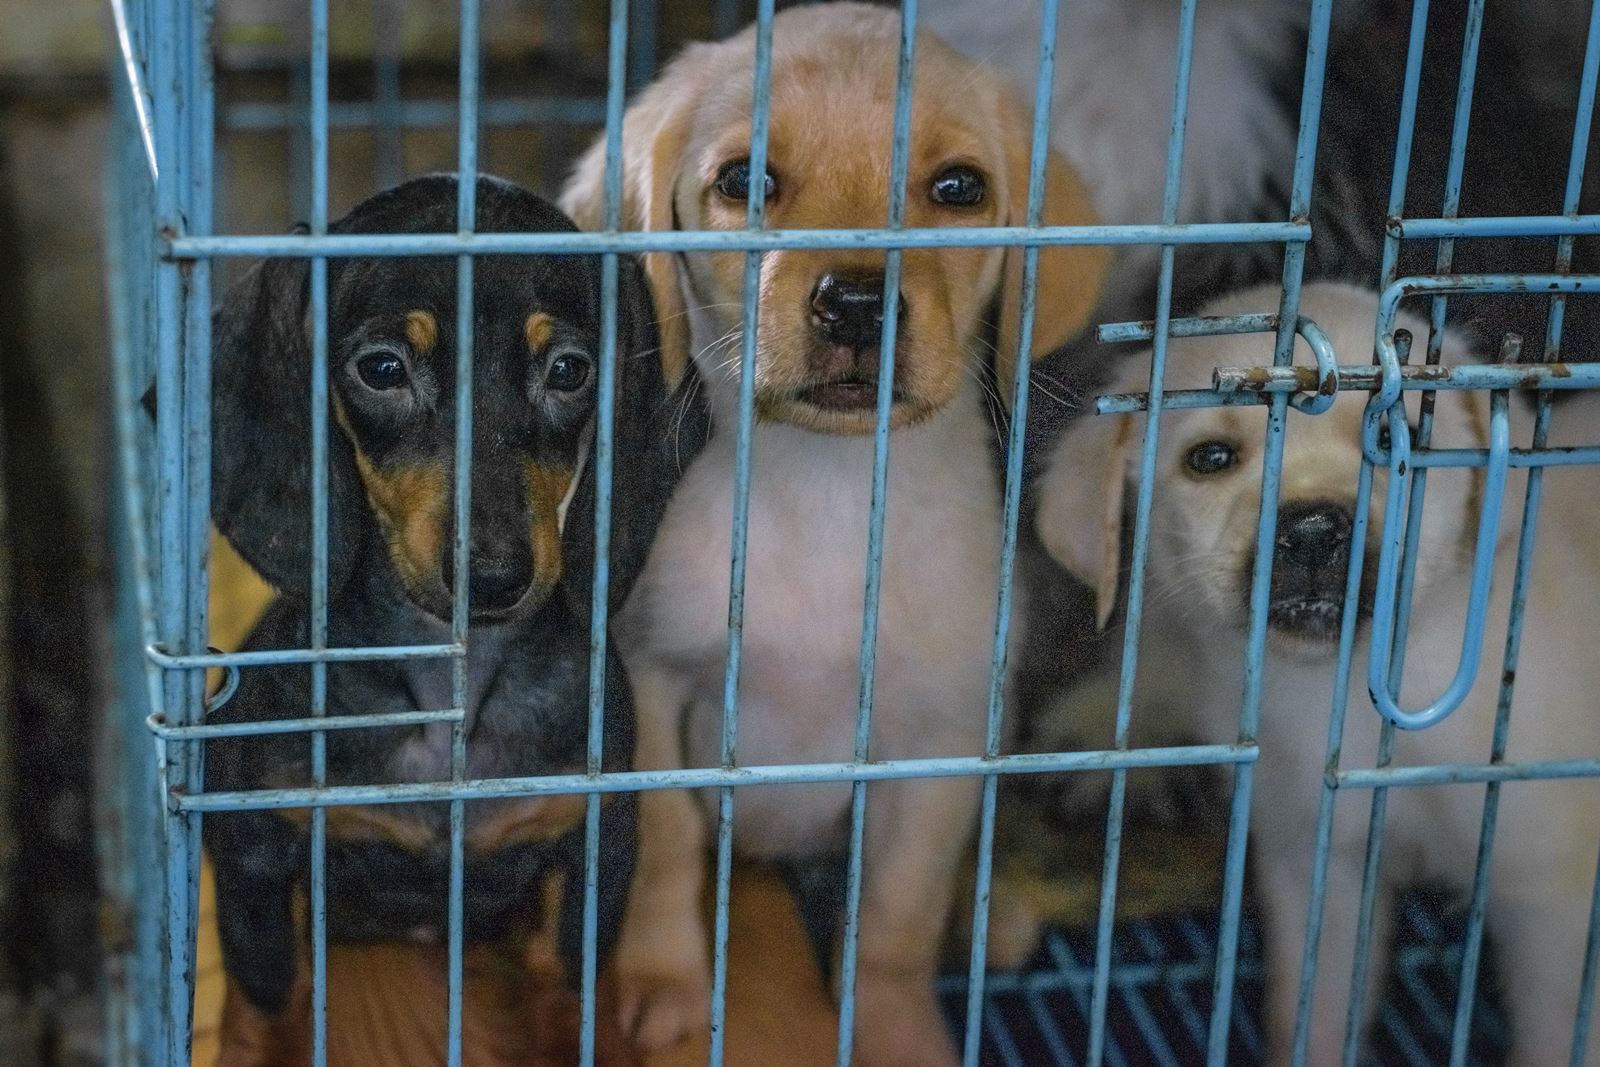 Puppies sold in Pet Shops: it is against the law to house puppies for sale in wire mesh cages such as this